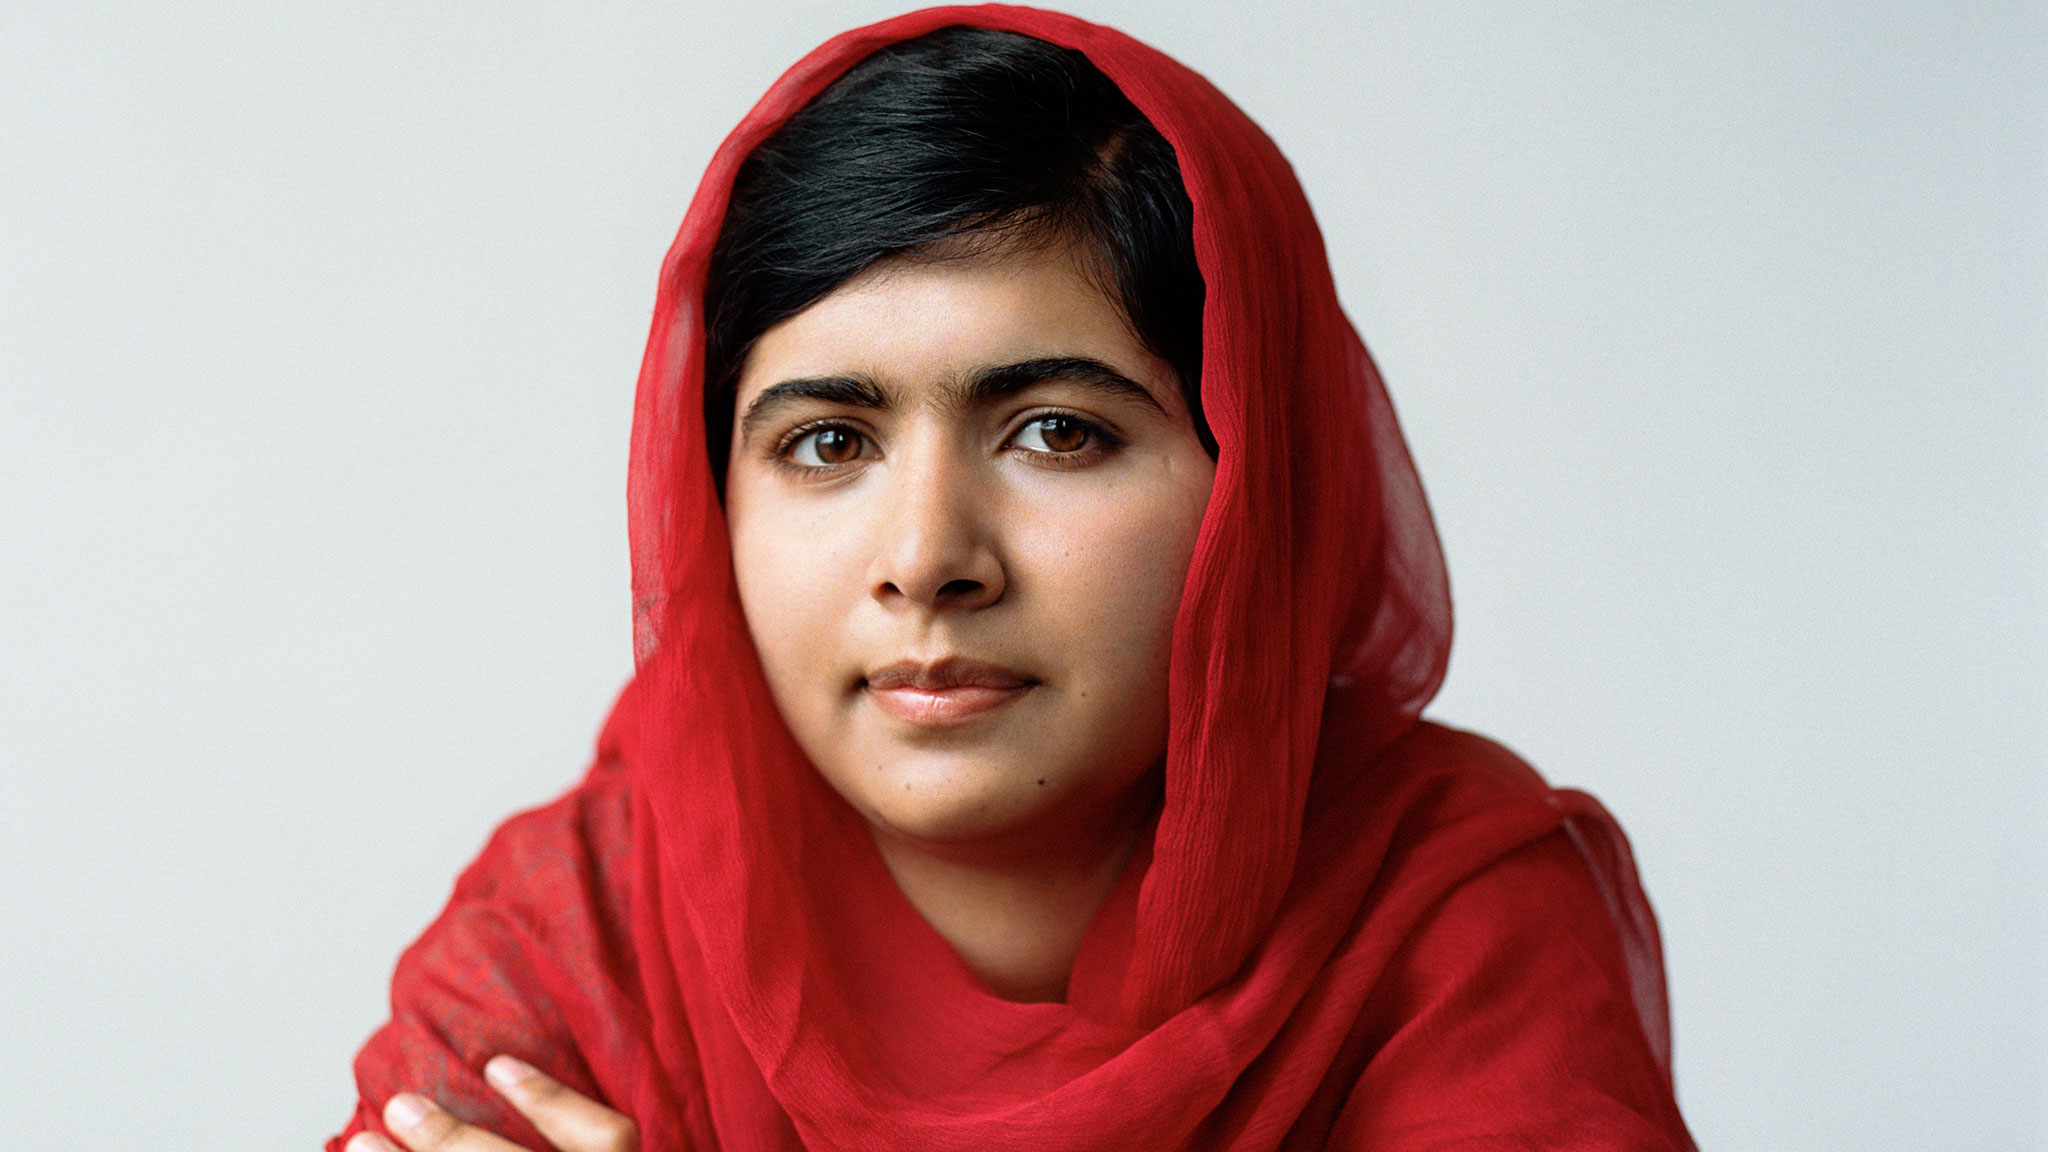 MALALA YOUSAFZAI: Have Suspects Secretly Been Released? |BRIC Plus.